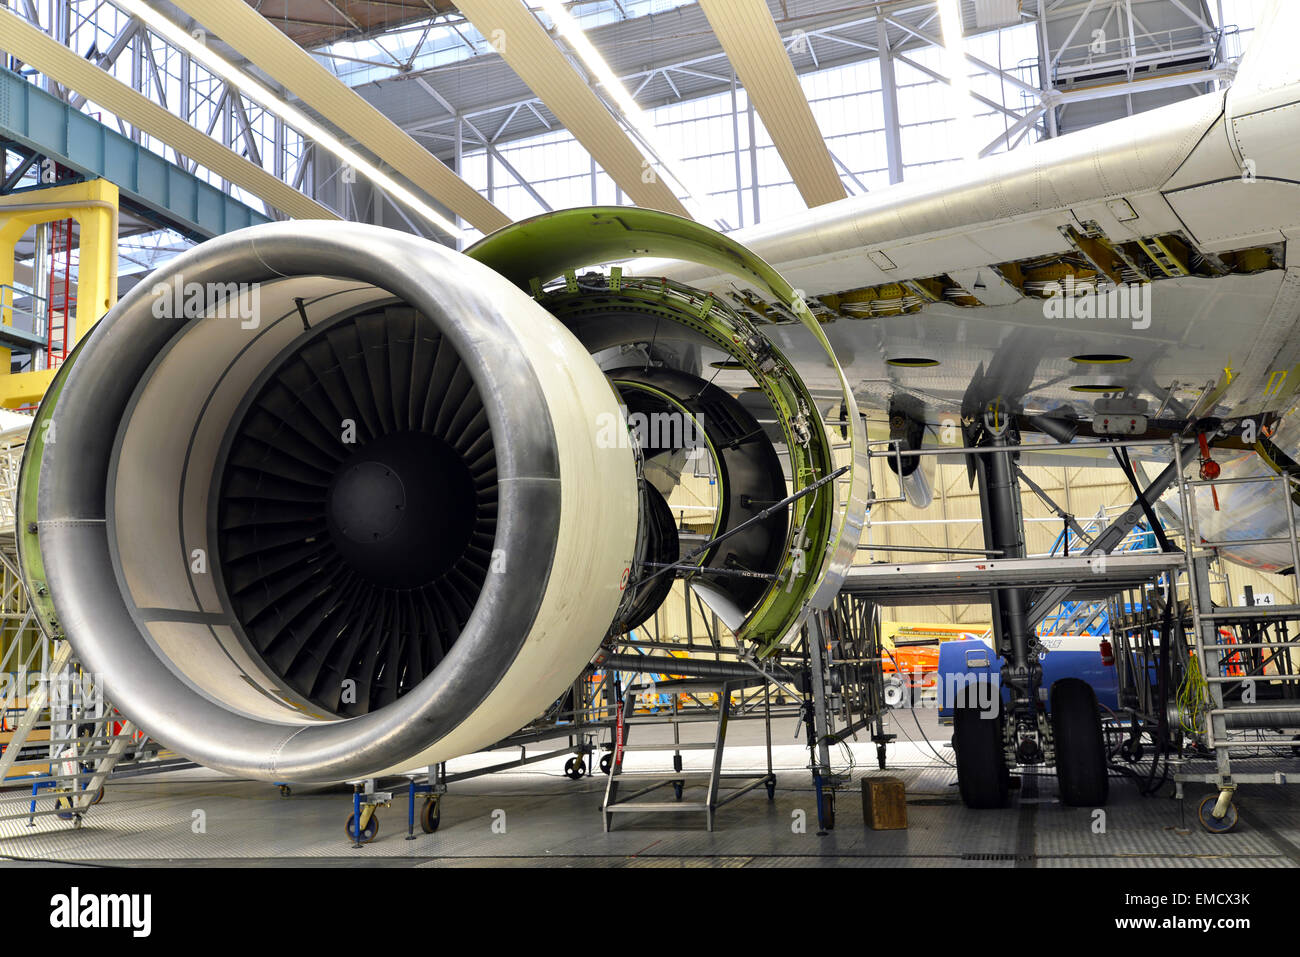 Jet engine of an unfinished airplane in a hangar Stock Photo